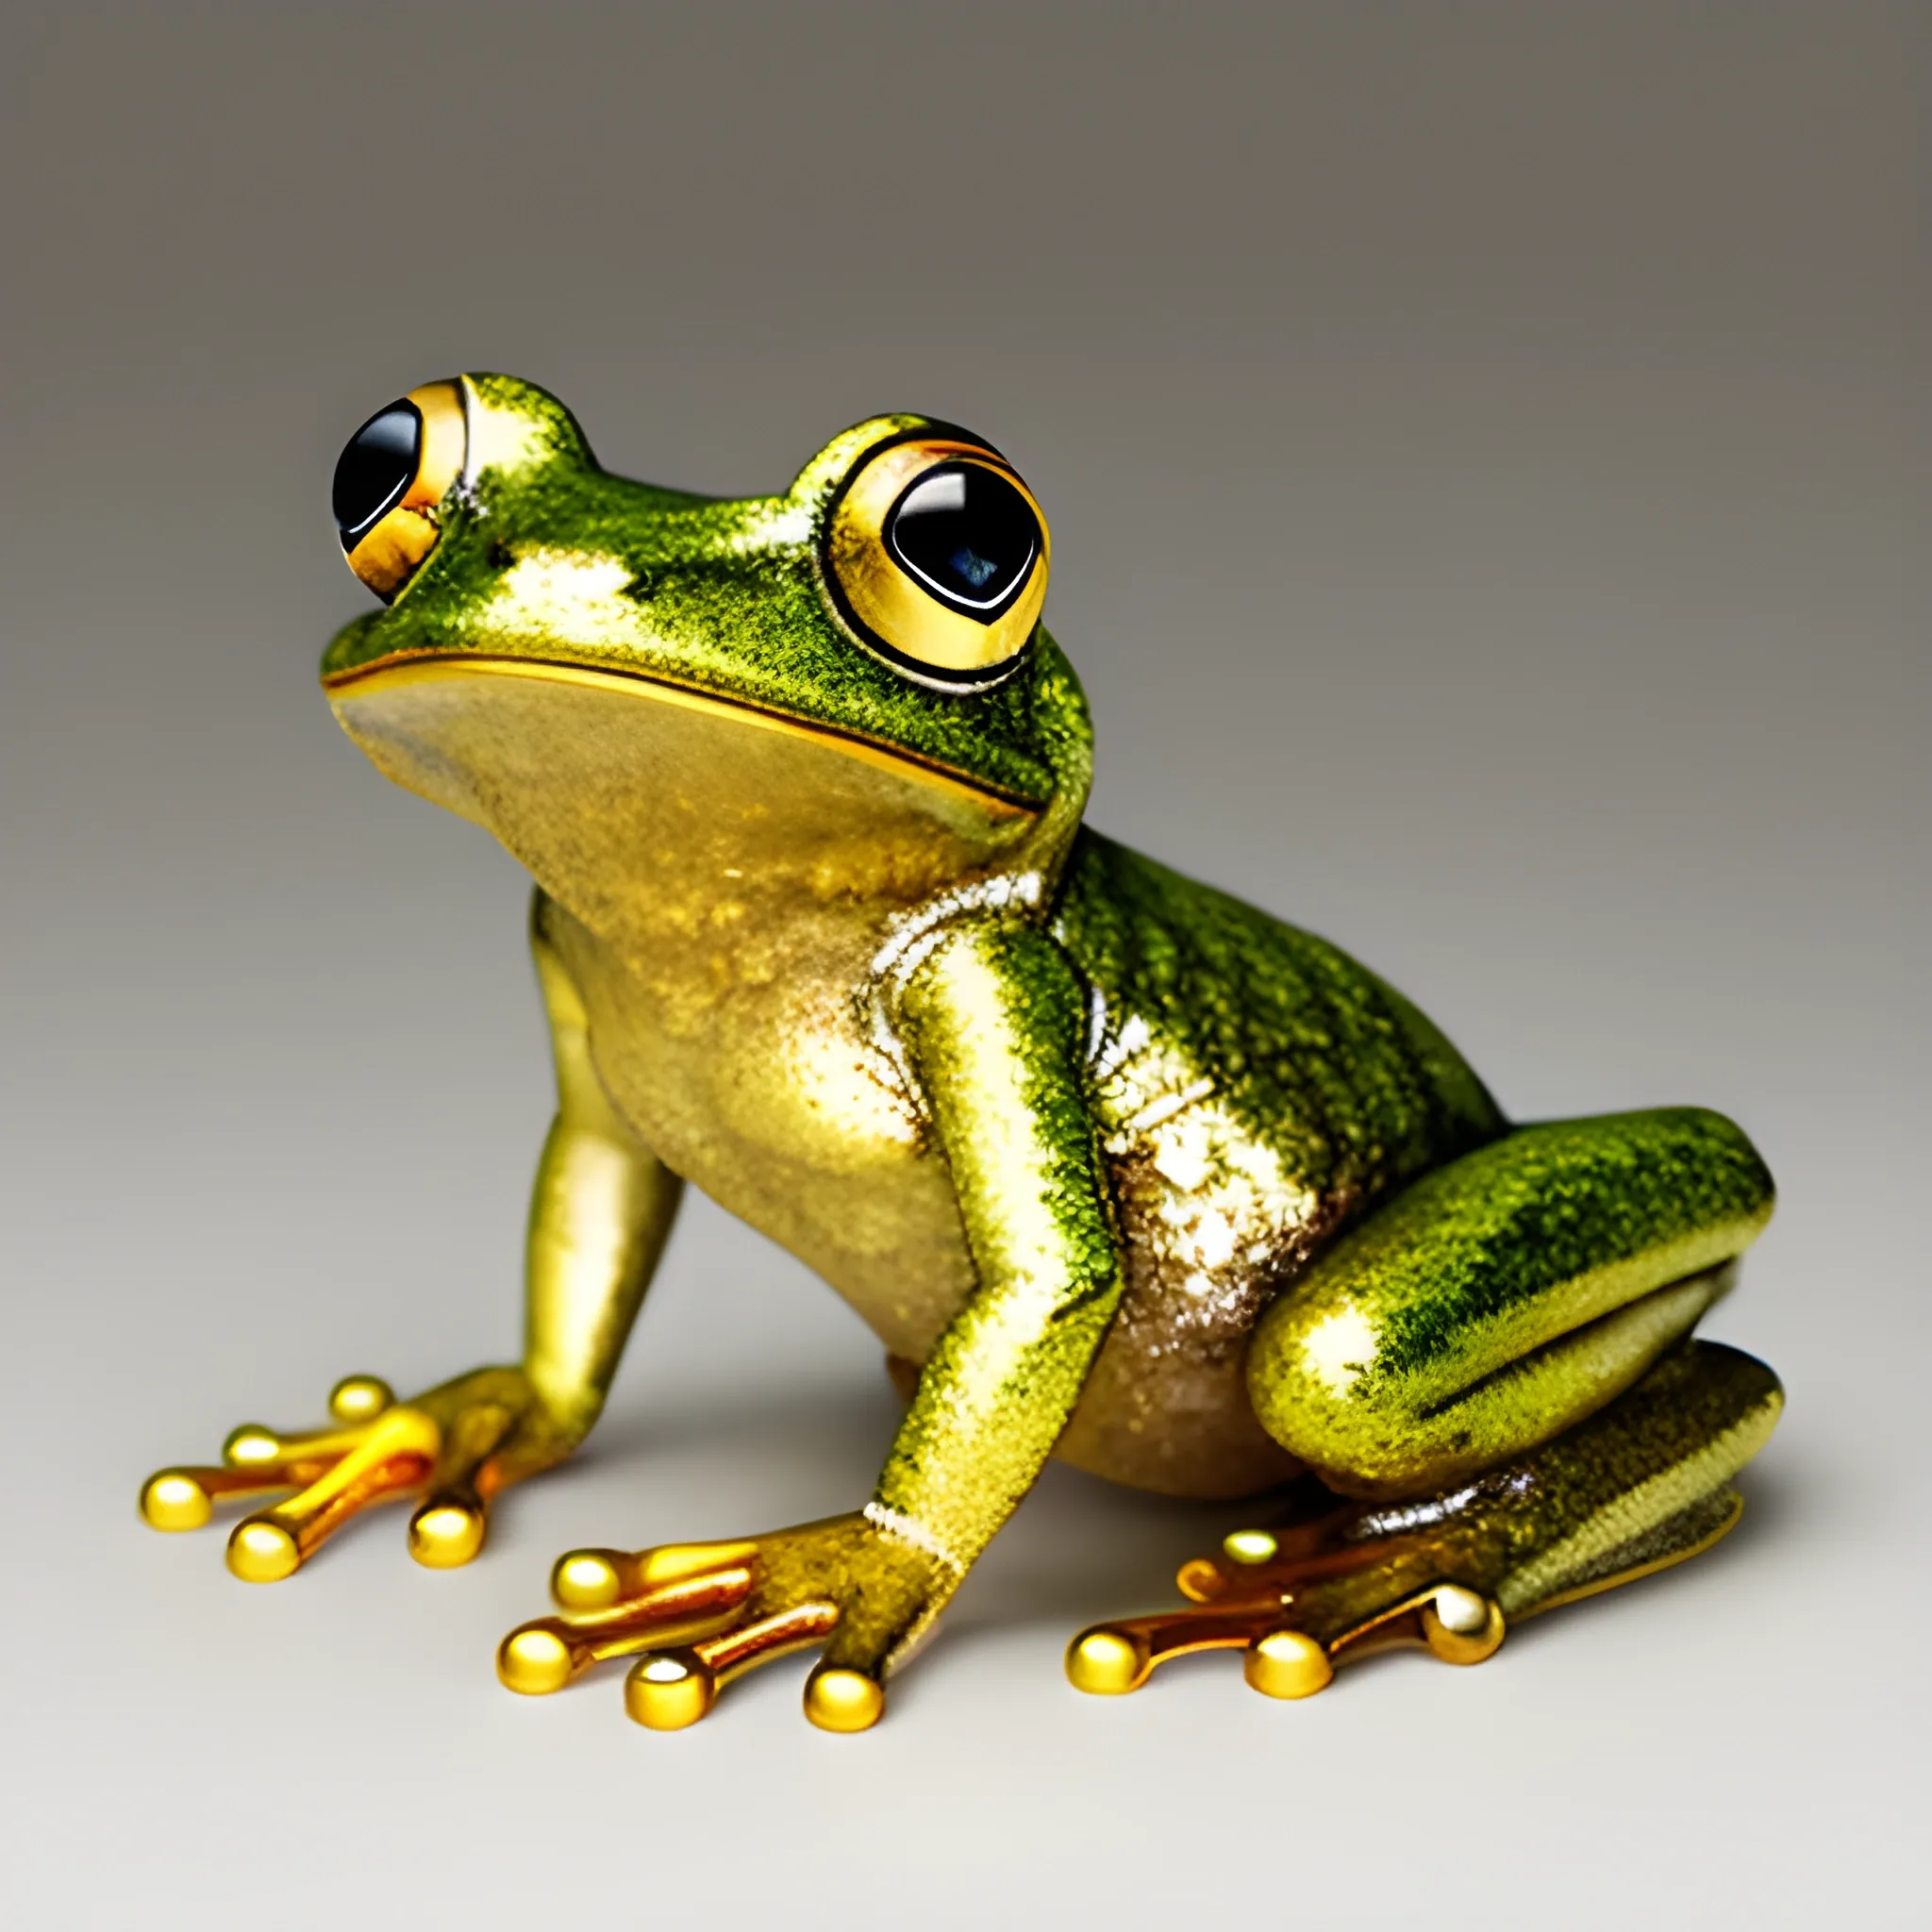 frog statue, crystal eyes, cute, golden, ancient

